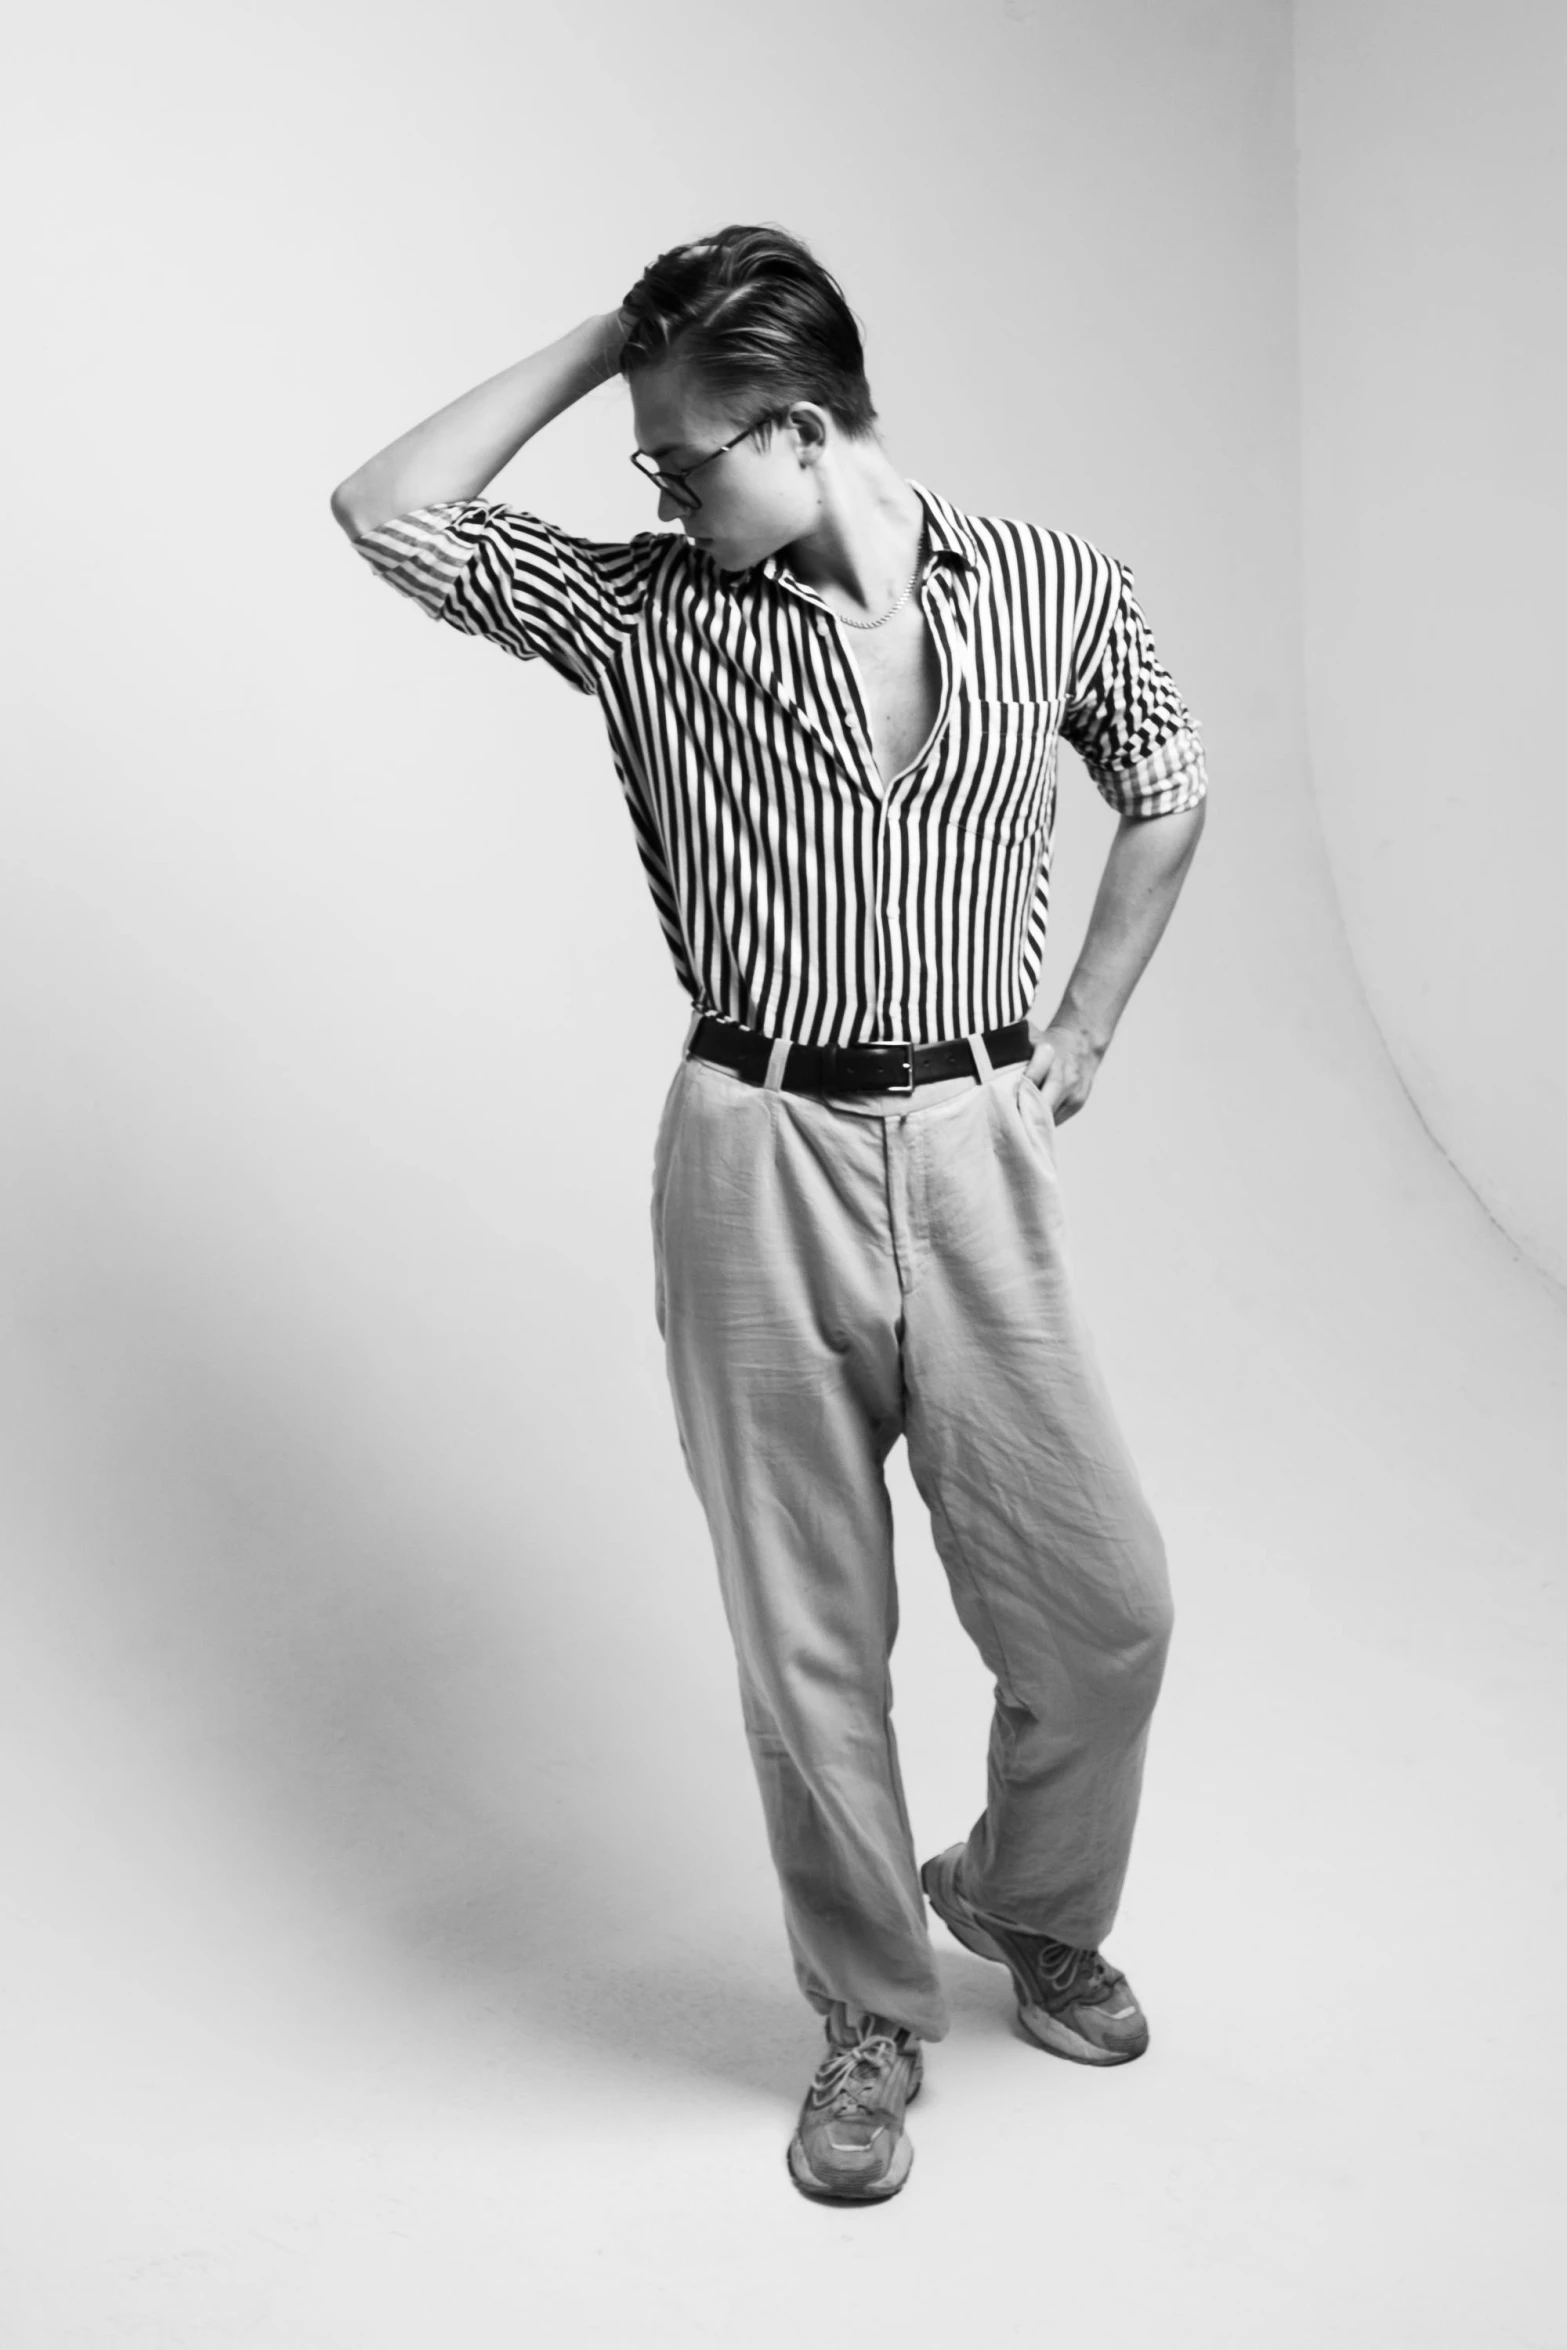 a man wearing striped shirt and pants standing up against a wall